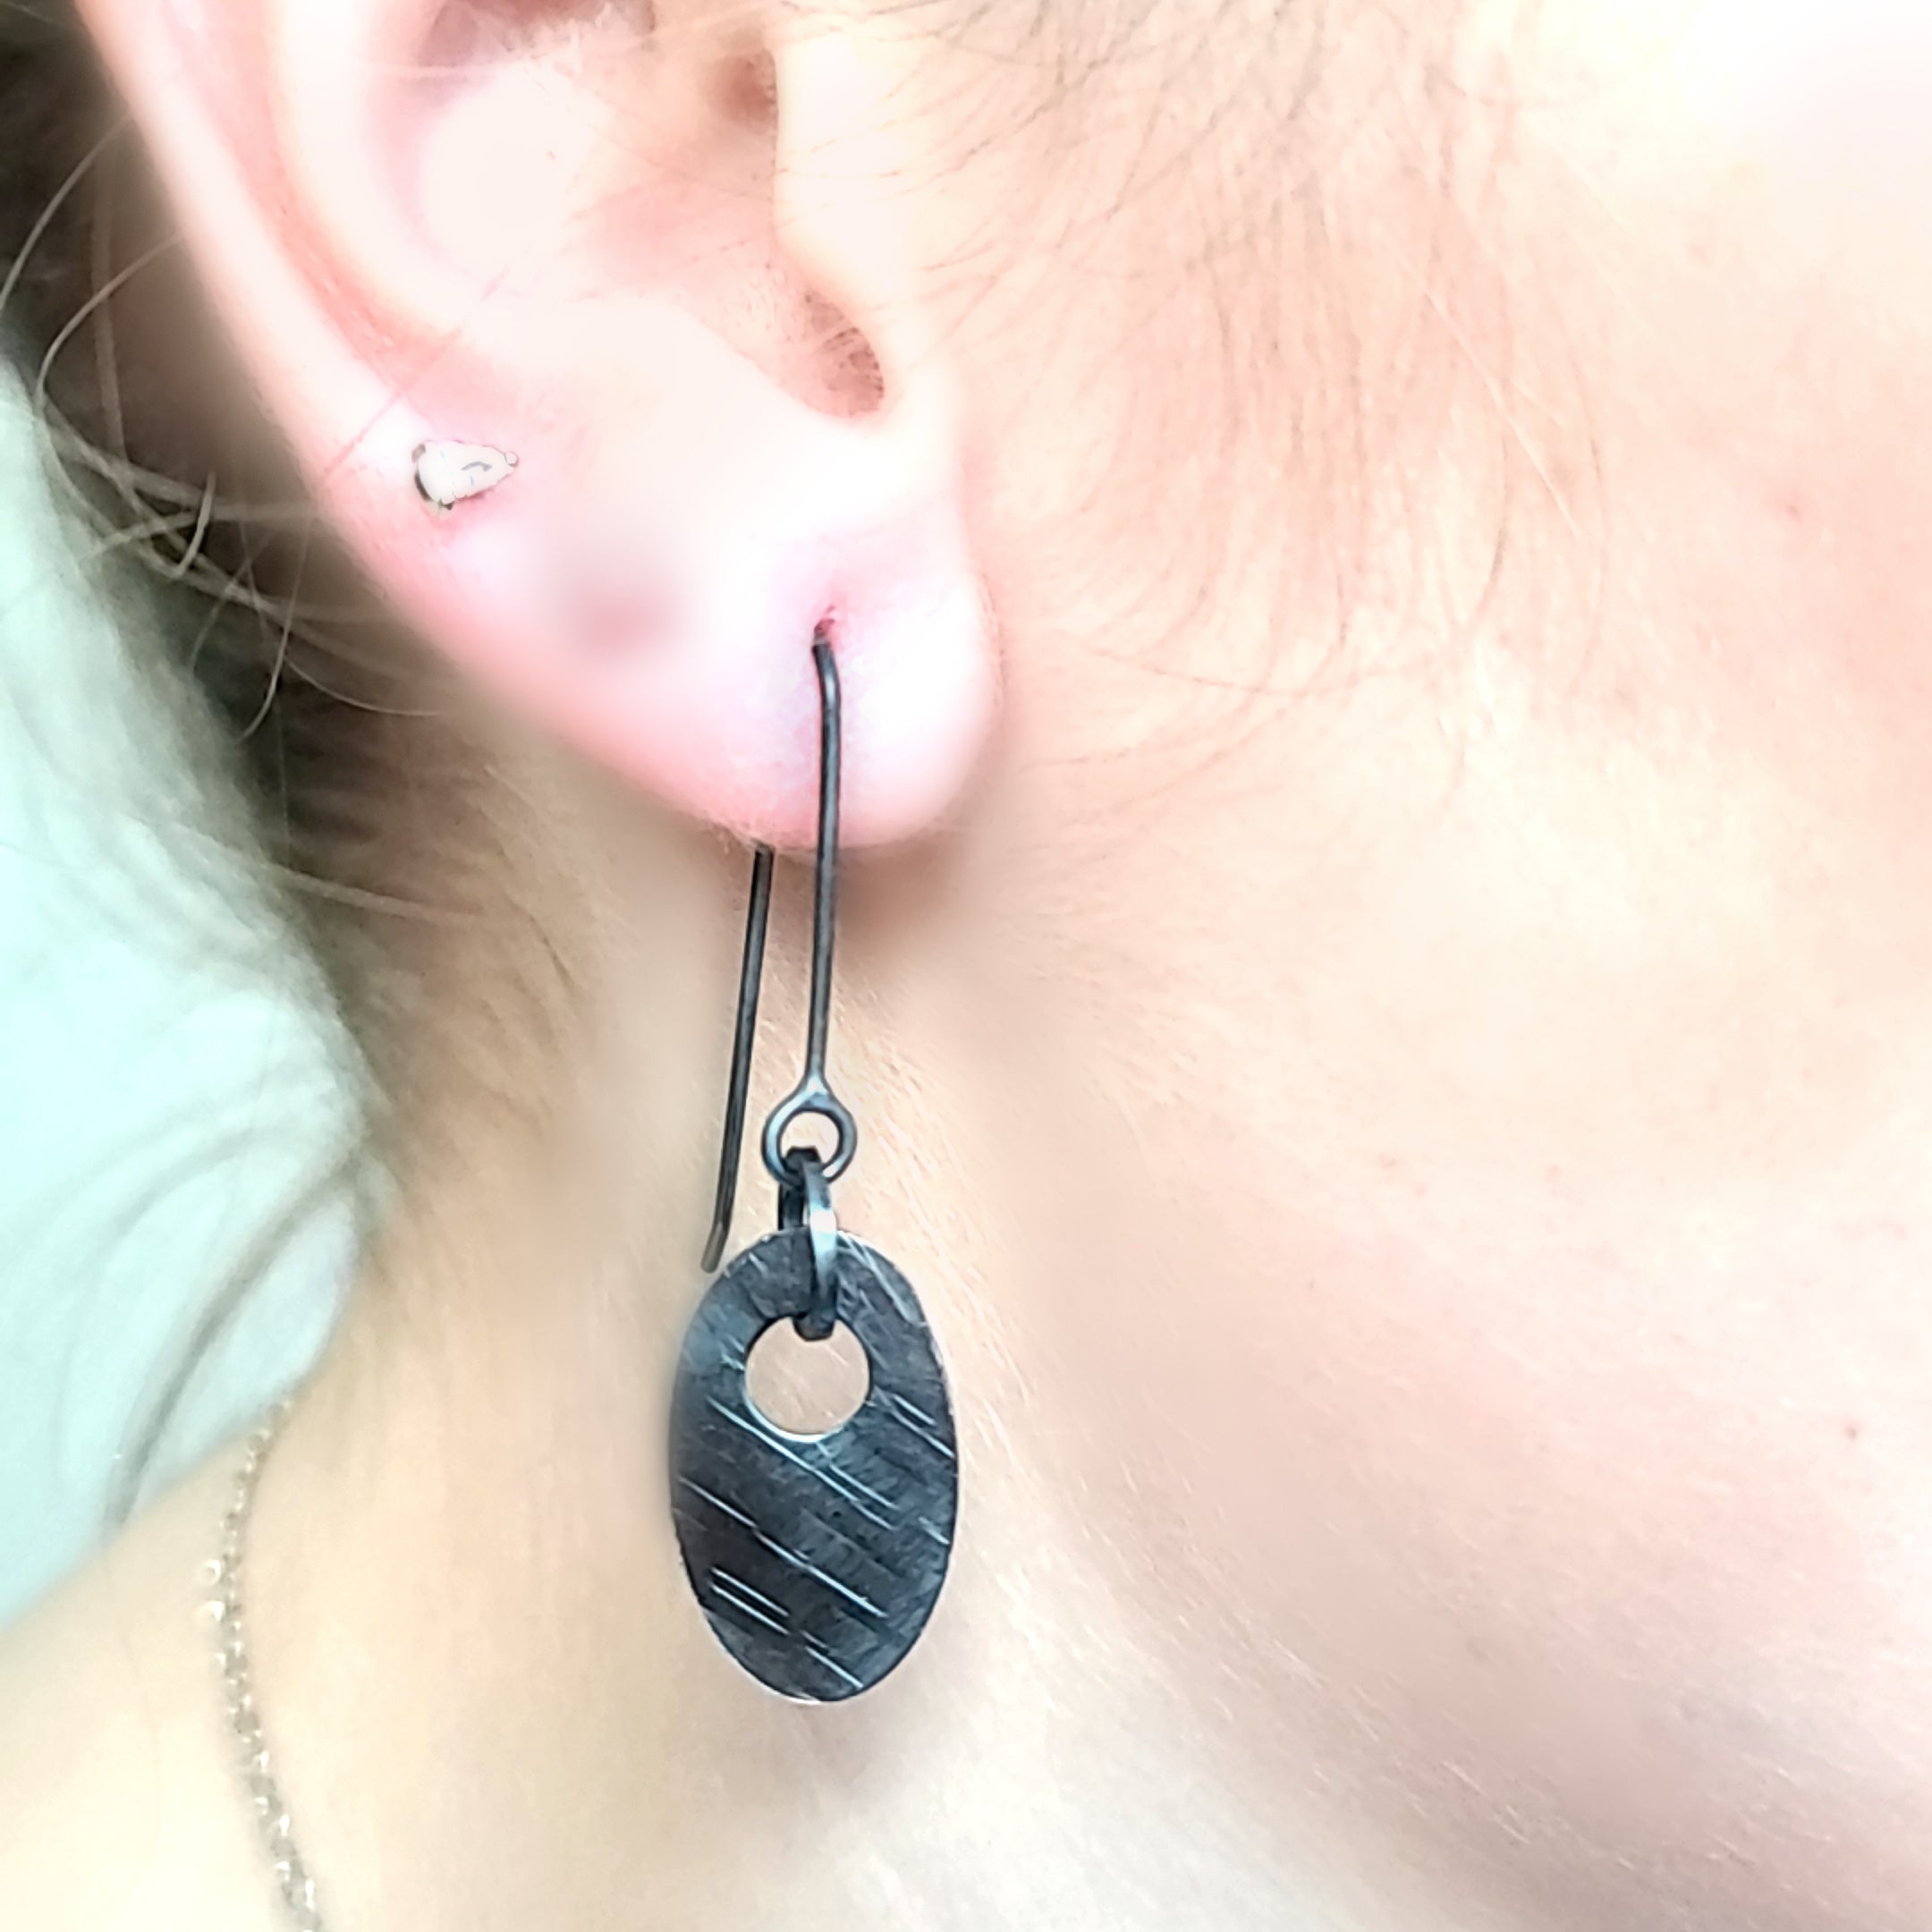 Model wearing Oxidized and hammered Sterling Silver earrings